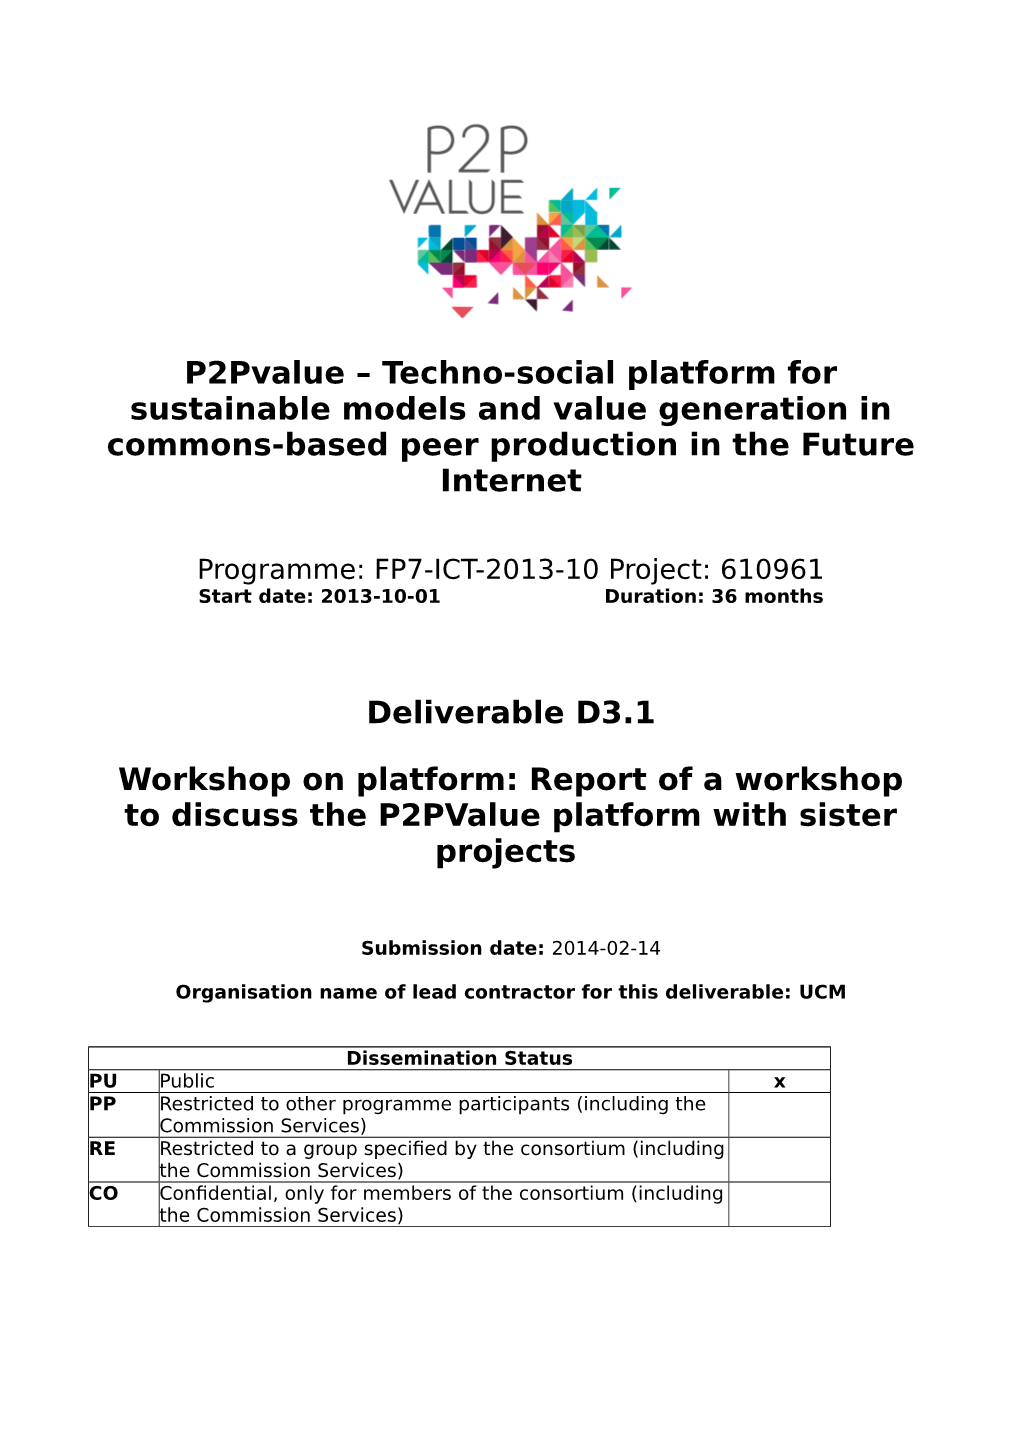 Workshop on Platform: Report of a Workshop to Discuss the P2pvalue Platform with Sister Projects